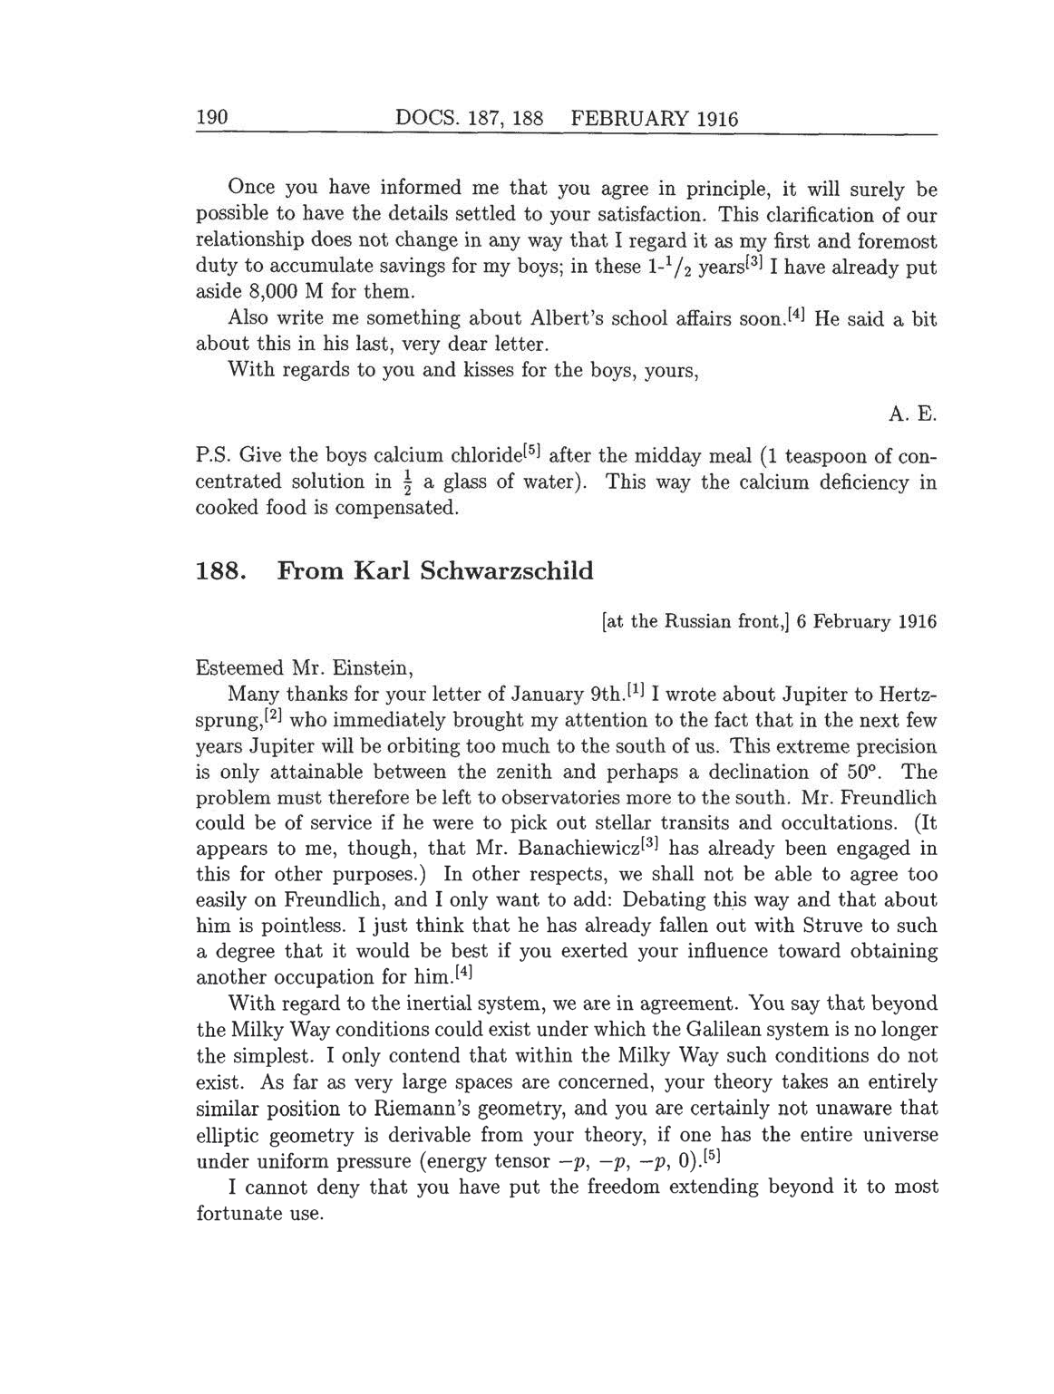 Volume 8: The Berlin Years: Correspondence, 1914-1918 (English translation supplement) page 190